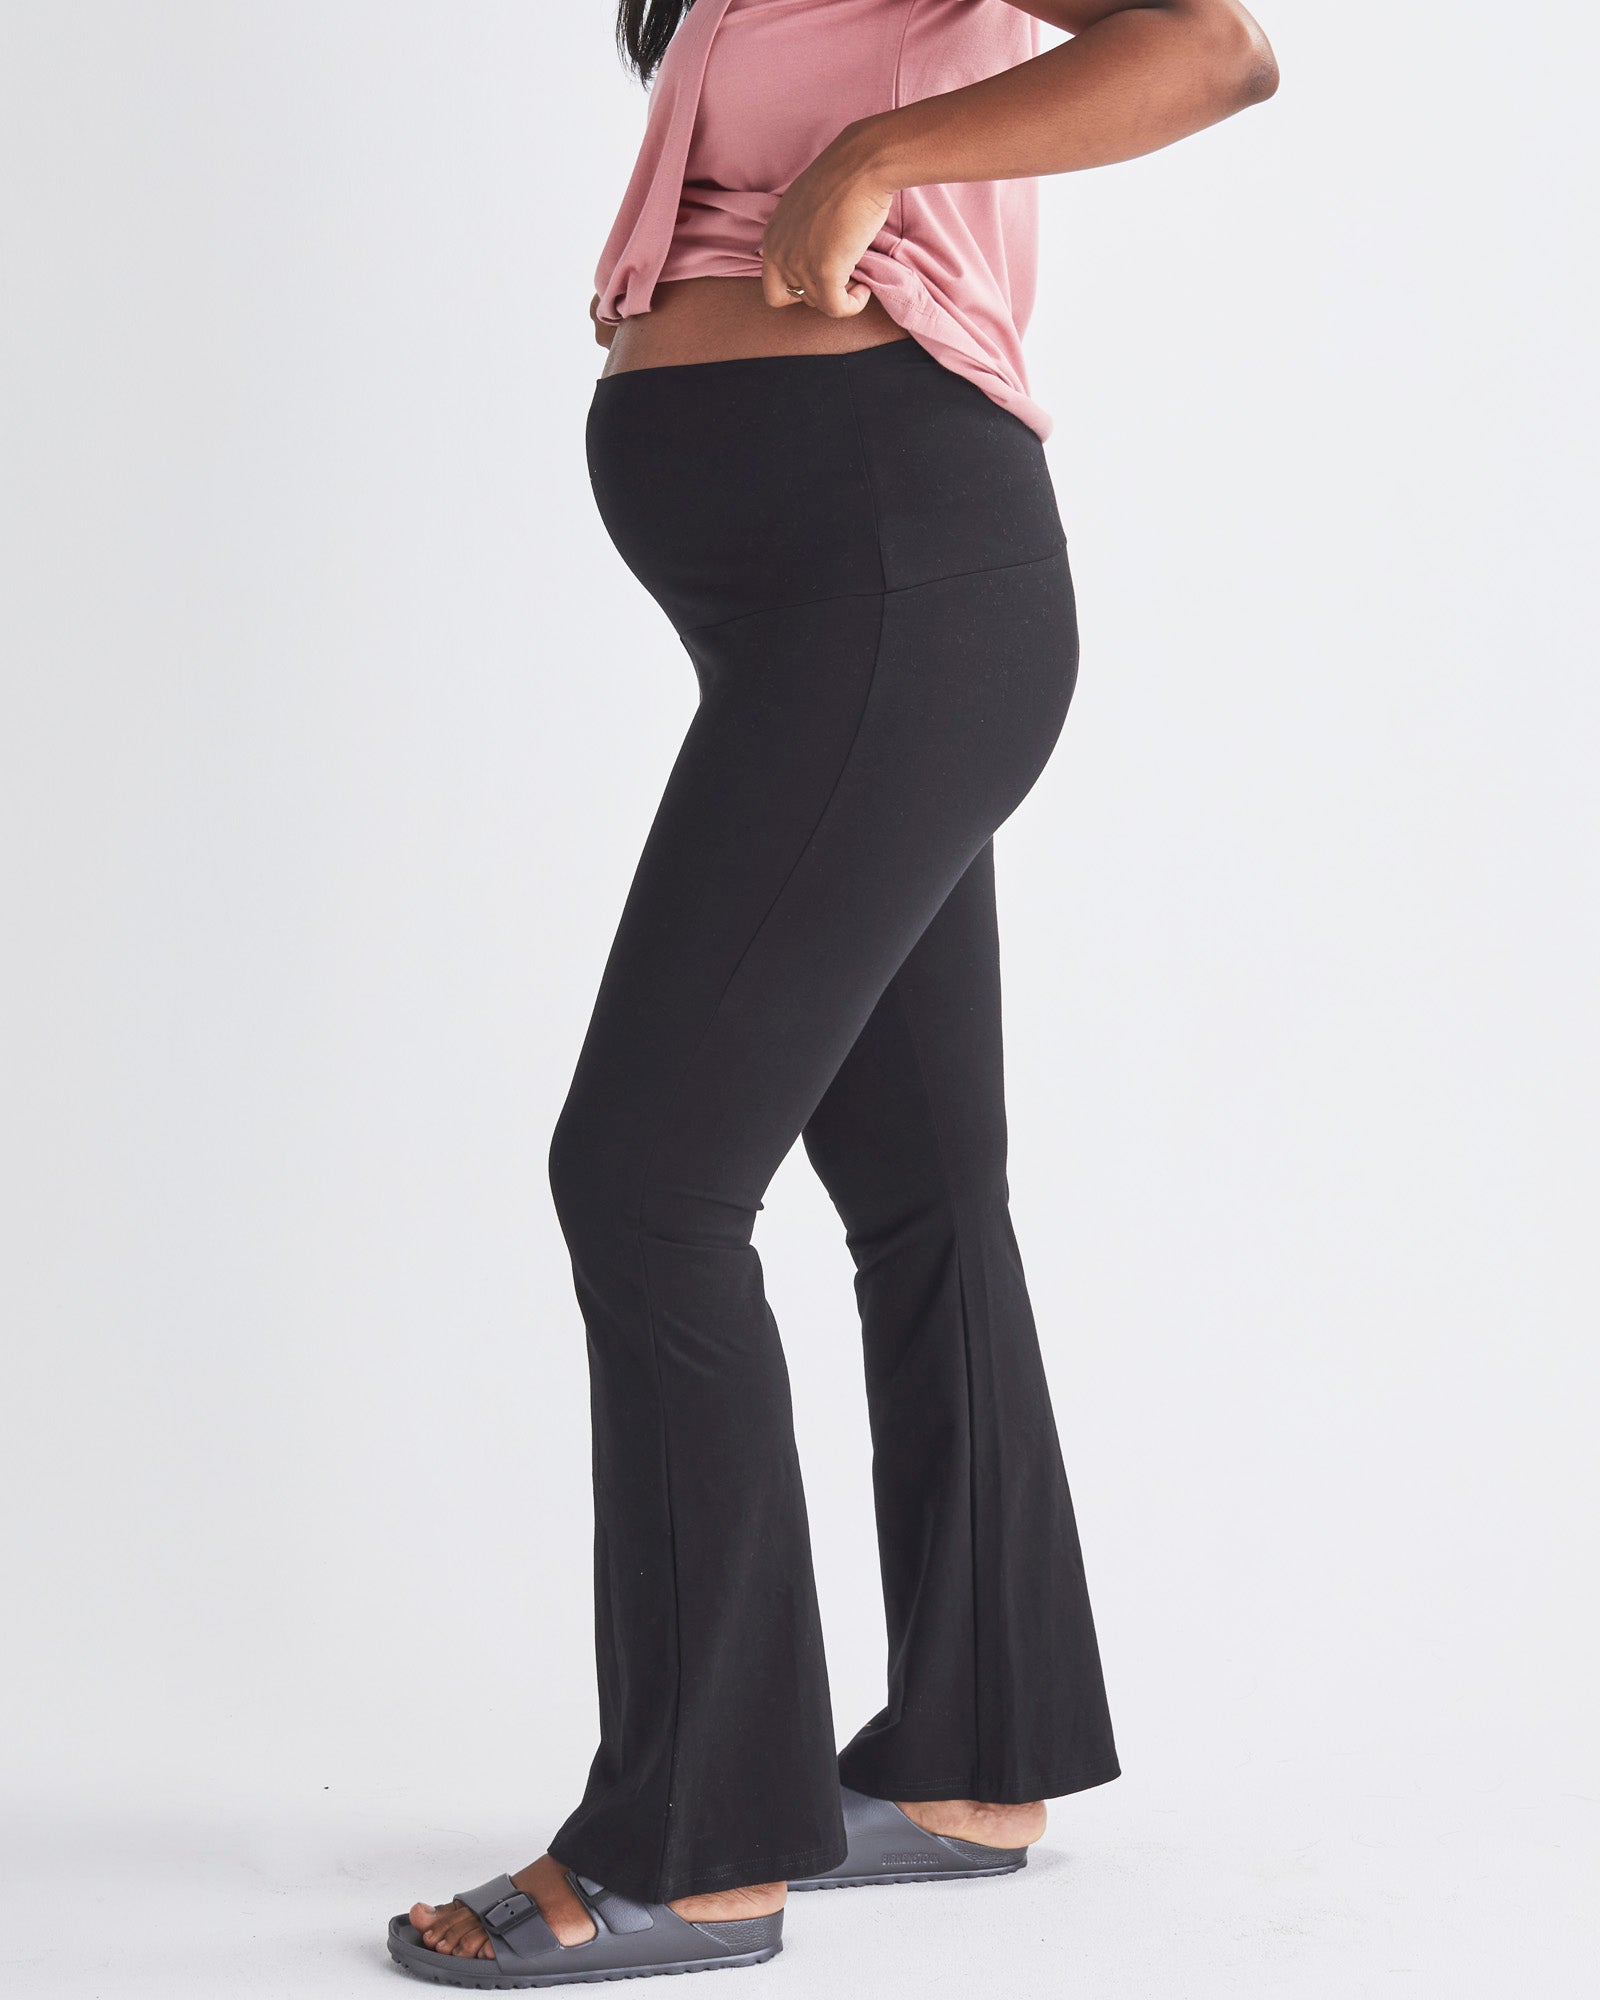 Side view - New Deluxe Flare Maternity Legging in Black